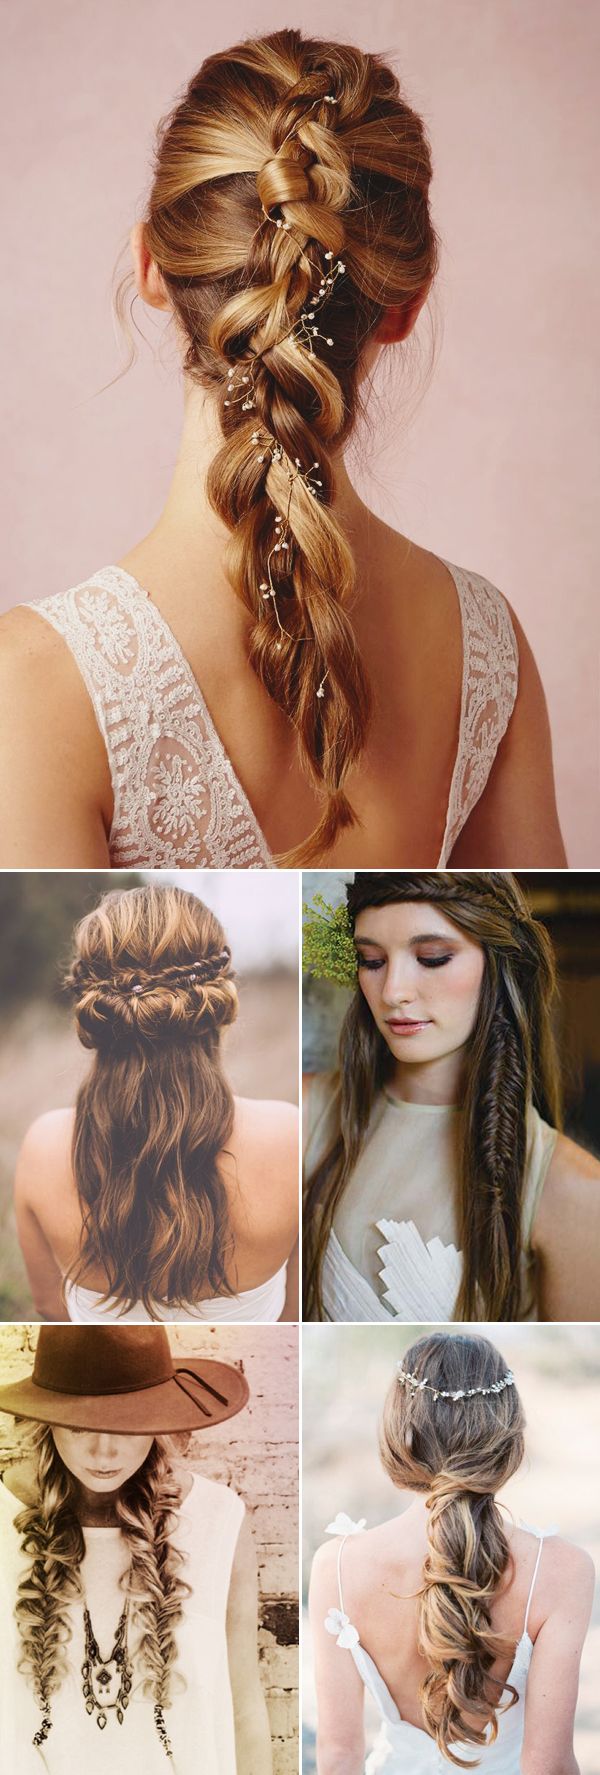 Braided Hairstyles for Long Hair